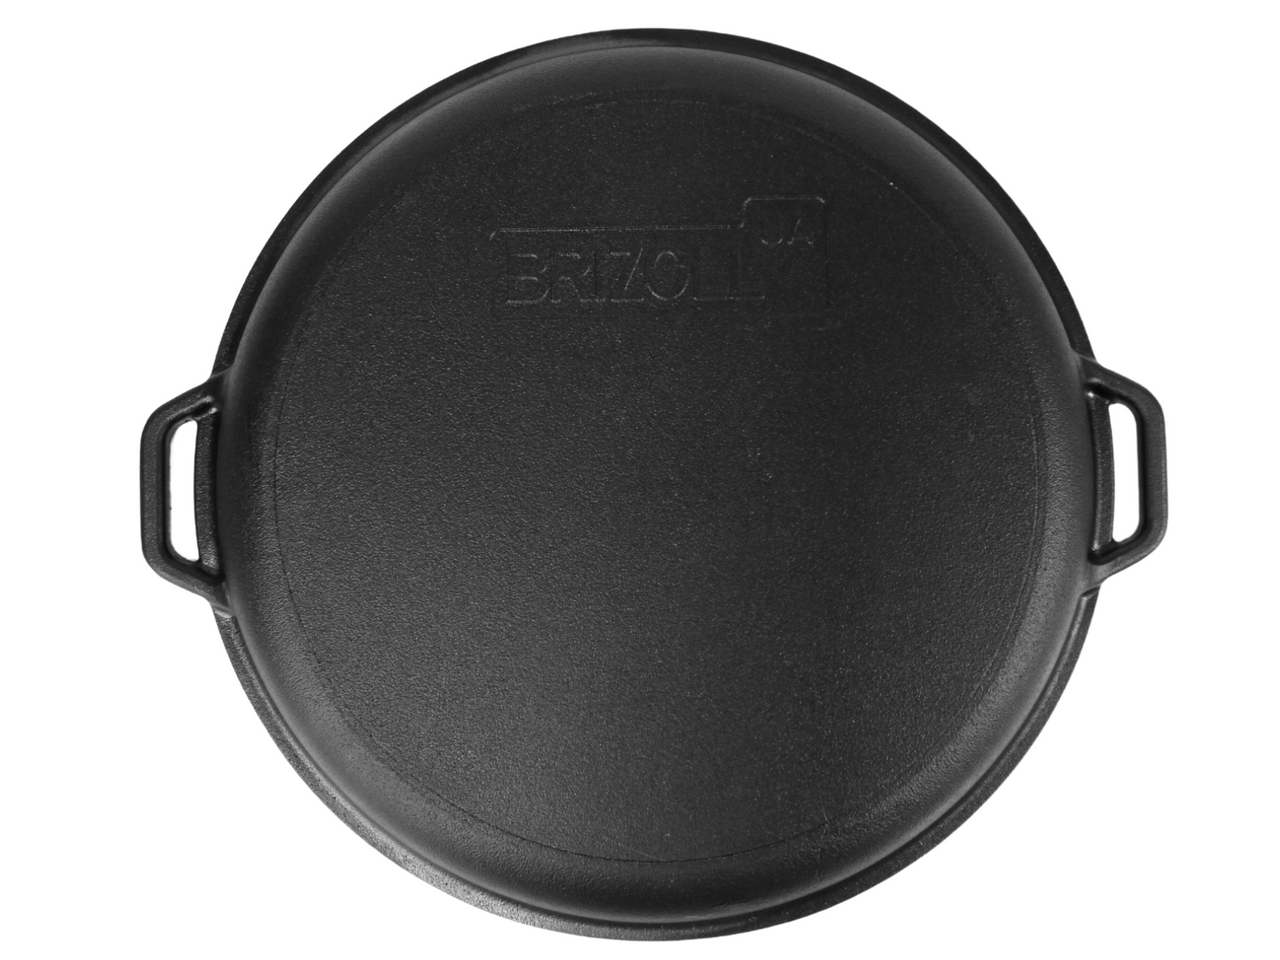 Cast iron asian cauldron 12 L WITH A GRILL LID-FRYING PAN and a bag